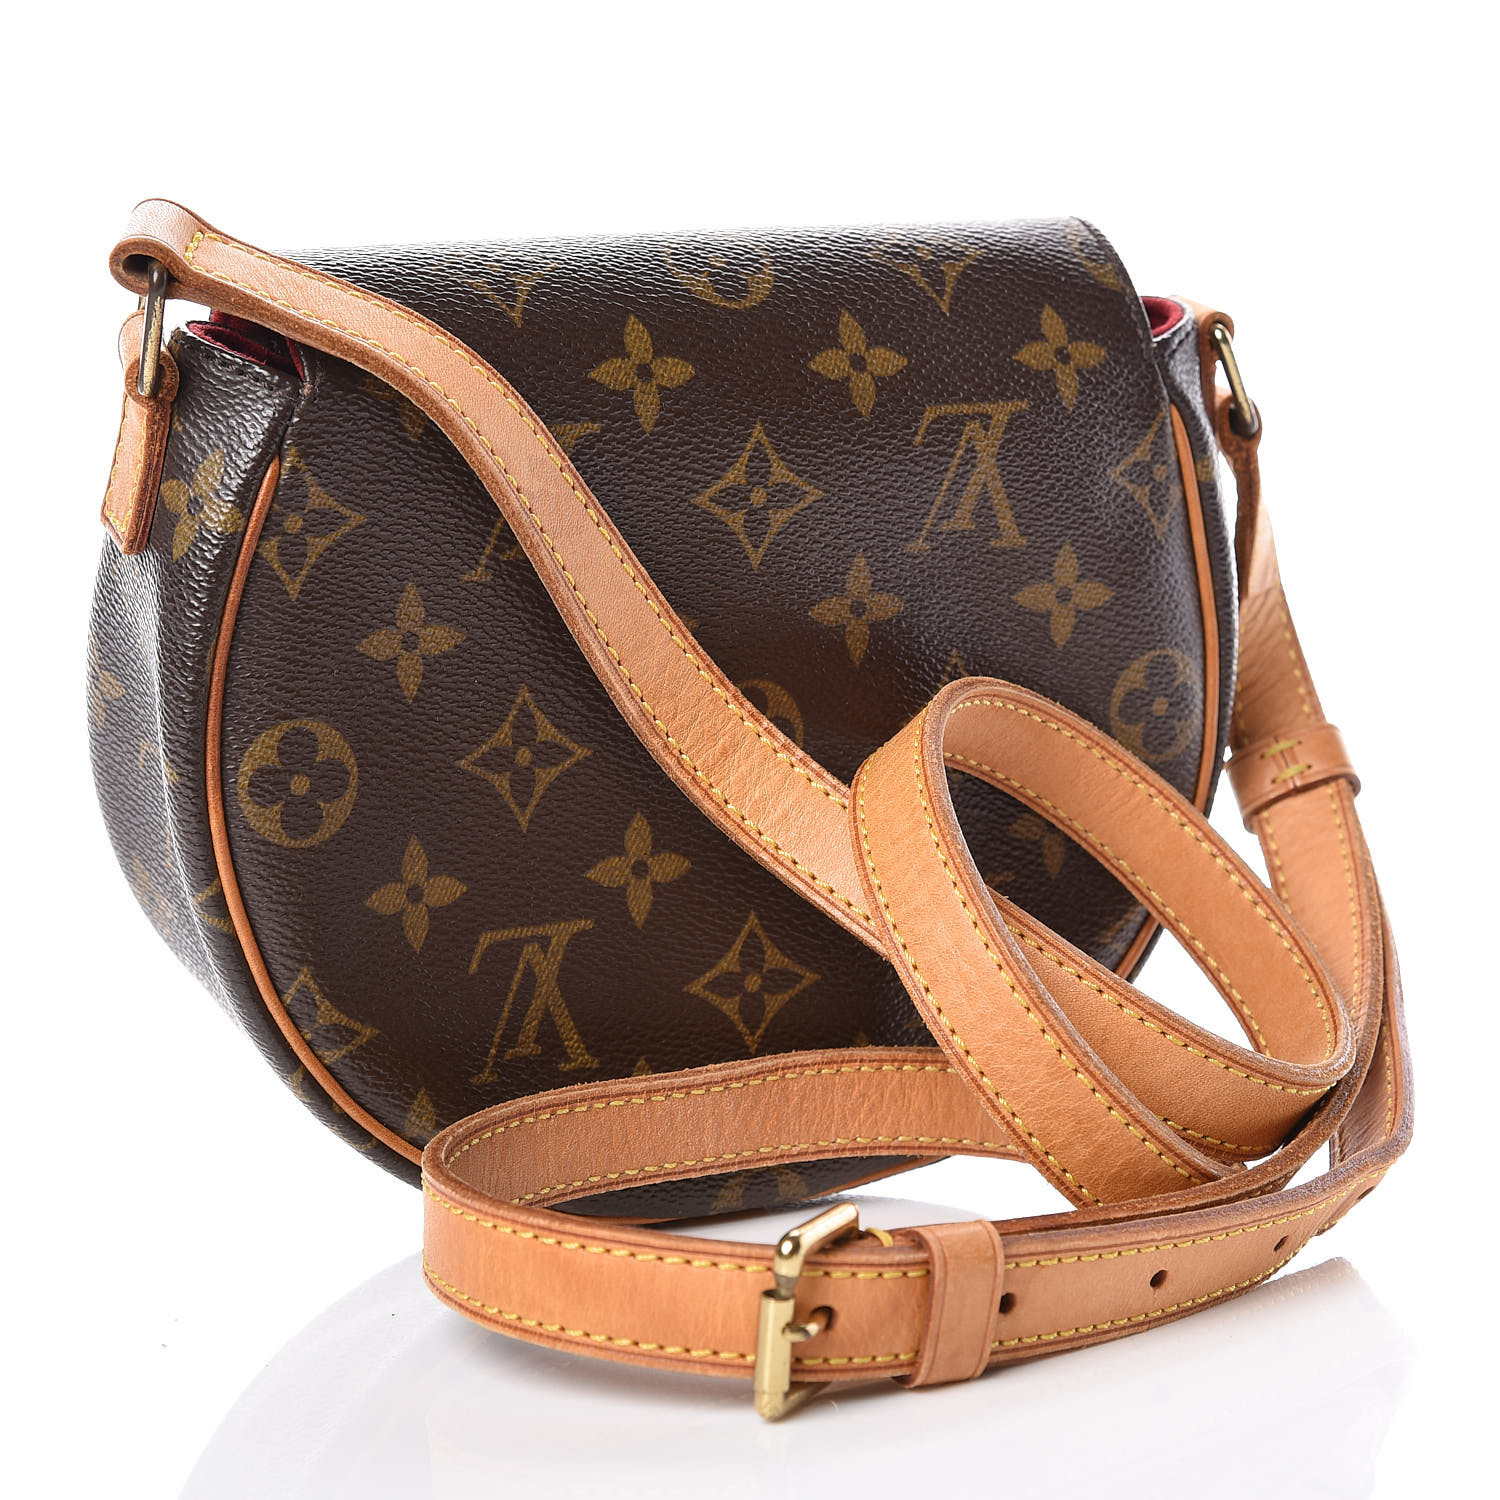 Louis Vuitton Tambour Monogram – QBB167 – 6,440 USD – The Watch Pages